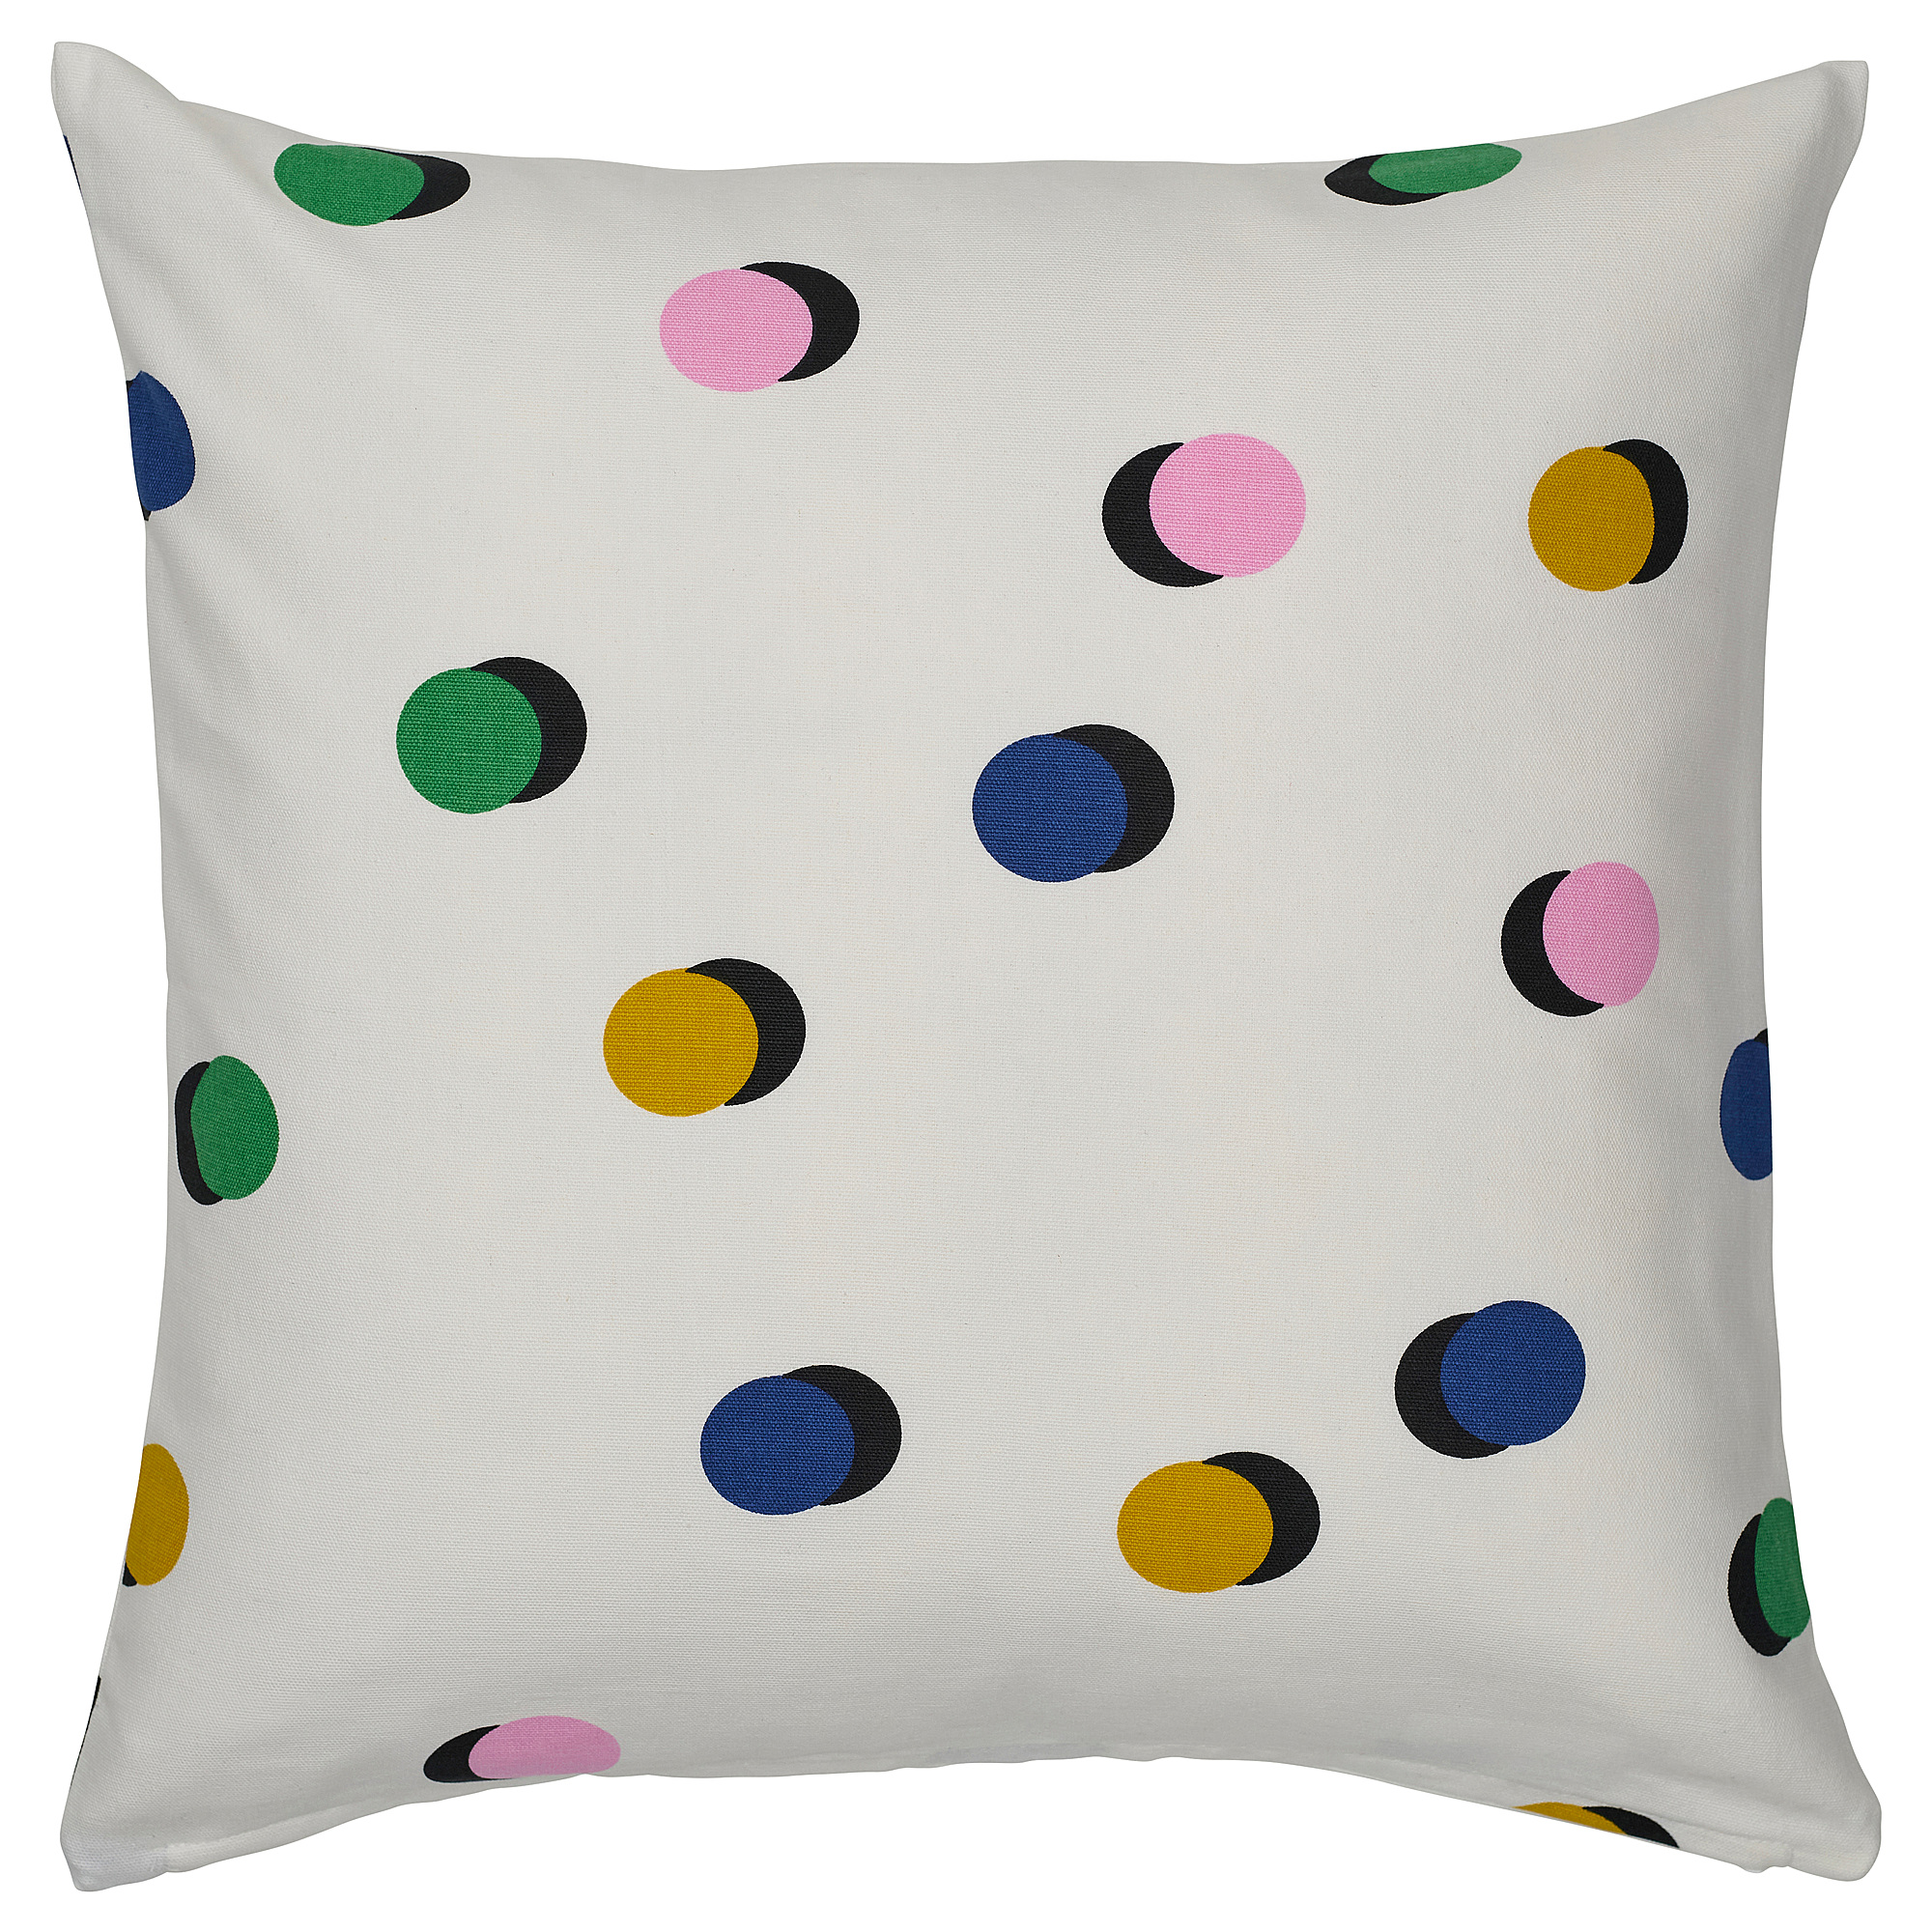 RUNDKRASSING cushion cover